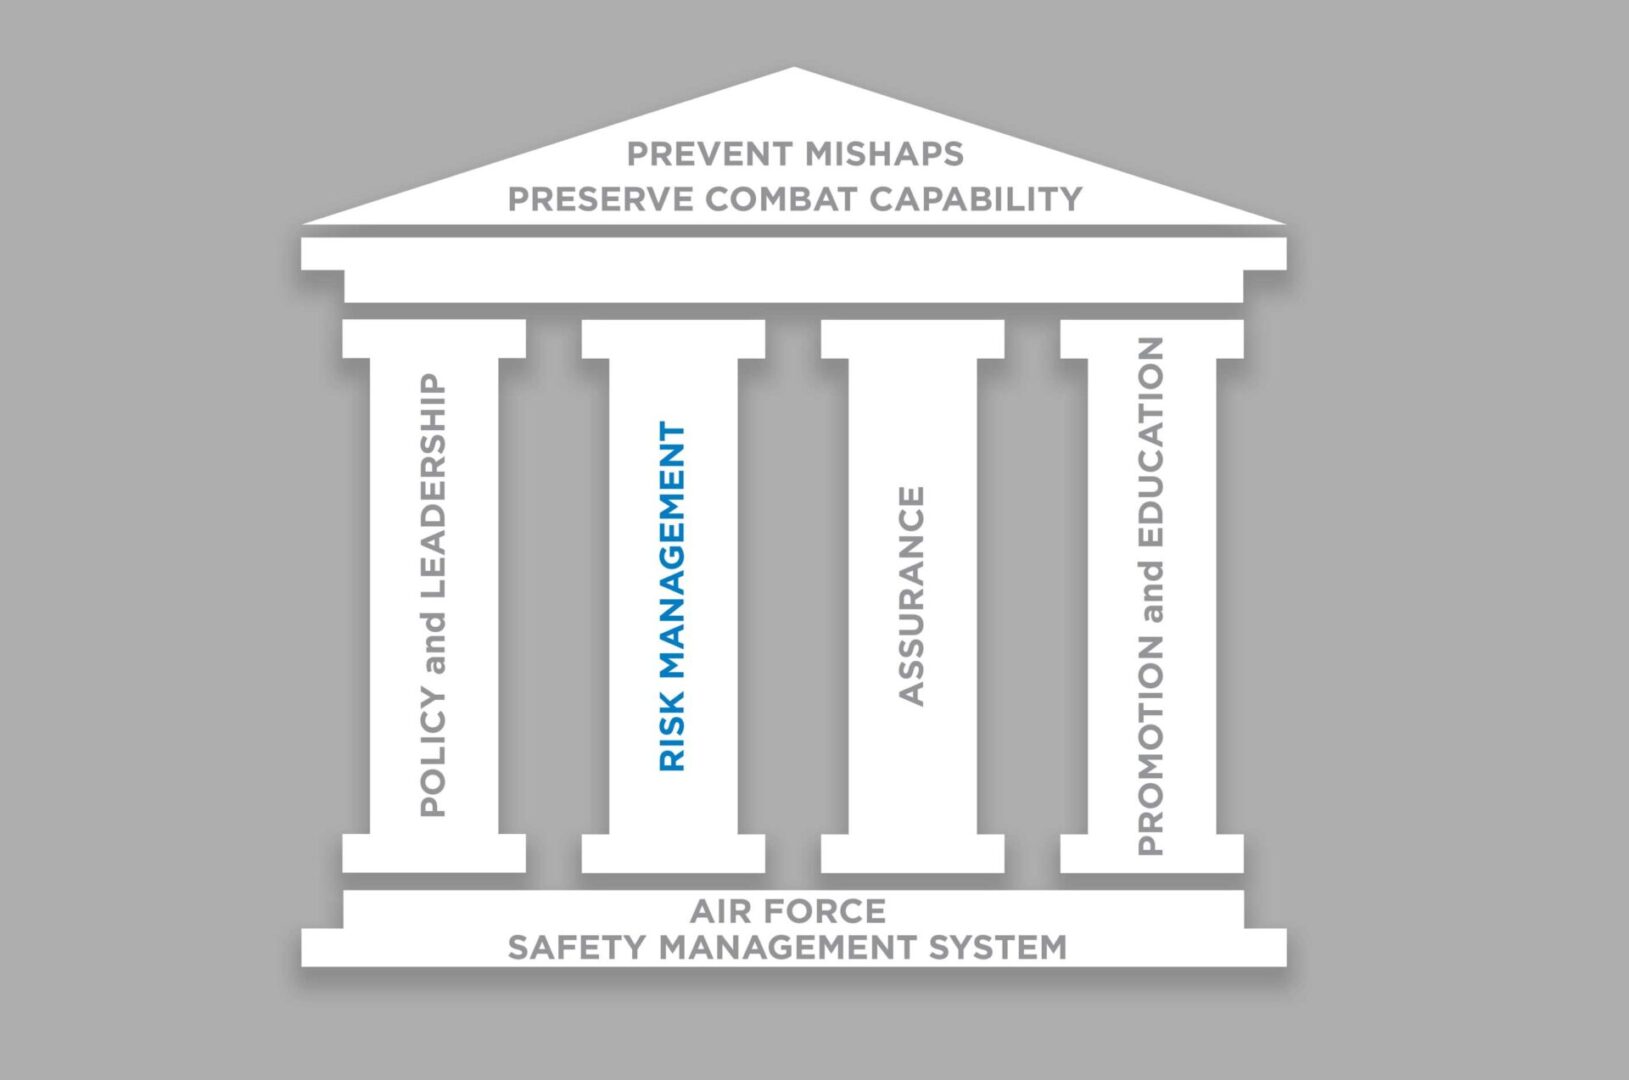 Air Force Safety Management System graphic.